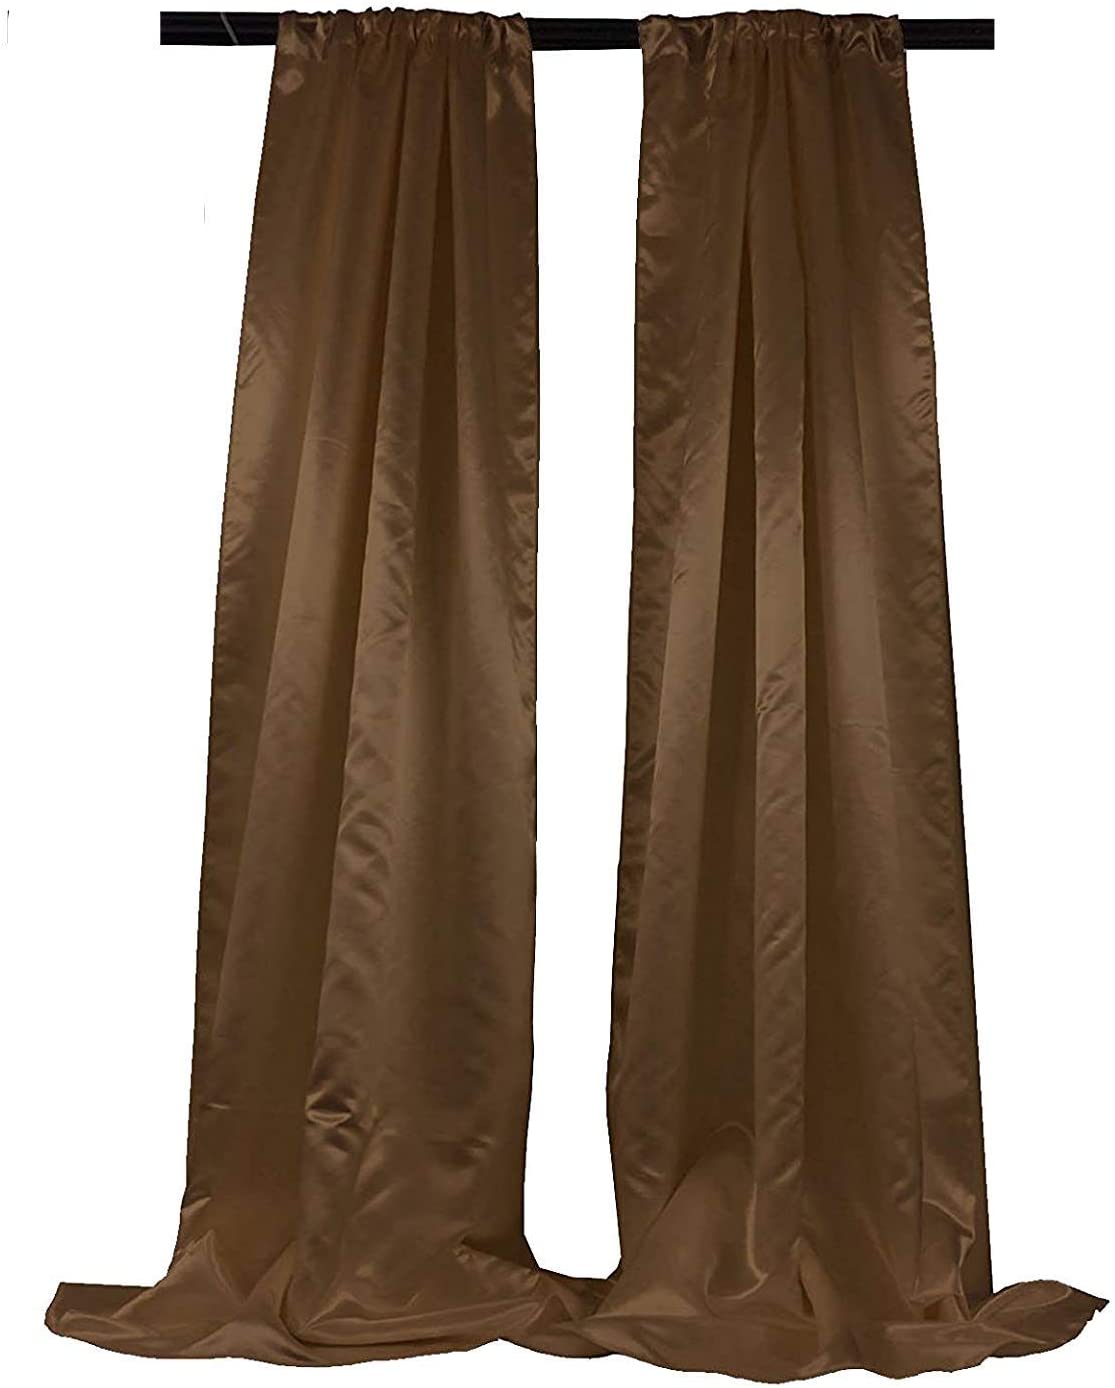 Polyester Bridal Satin Backdrop/Drape. Curtain Panel with 4" Rod Pocket on top, 1 Pair (Brown,